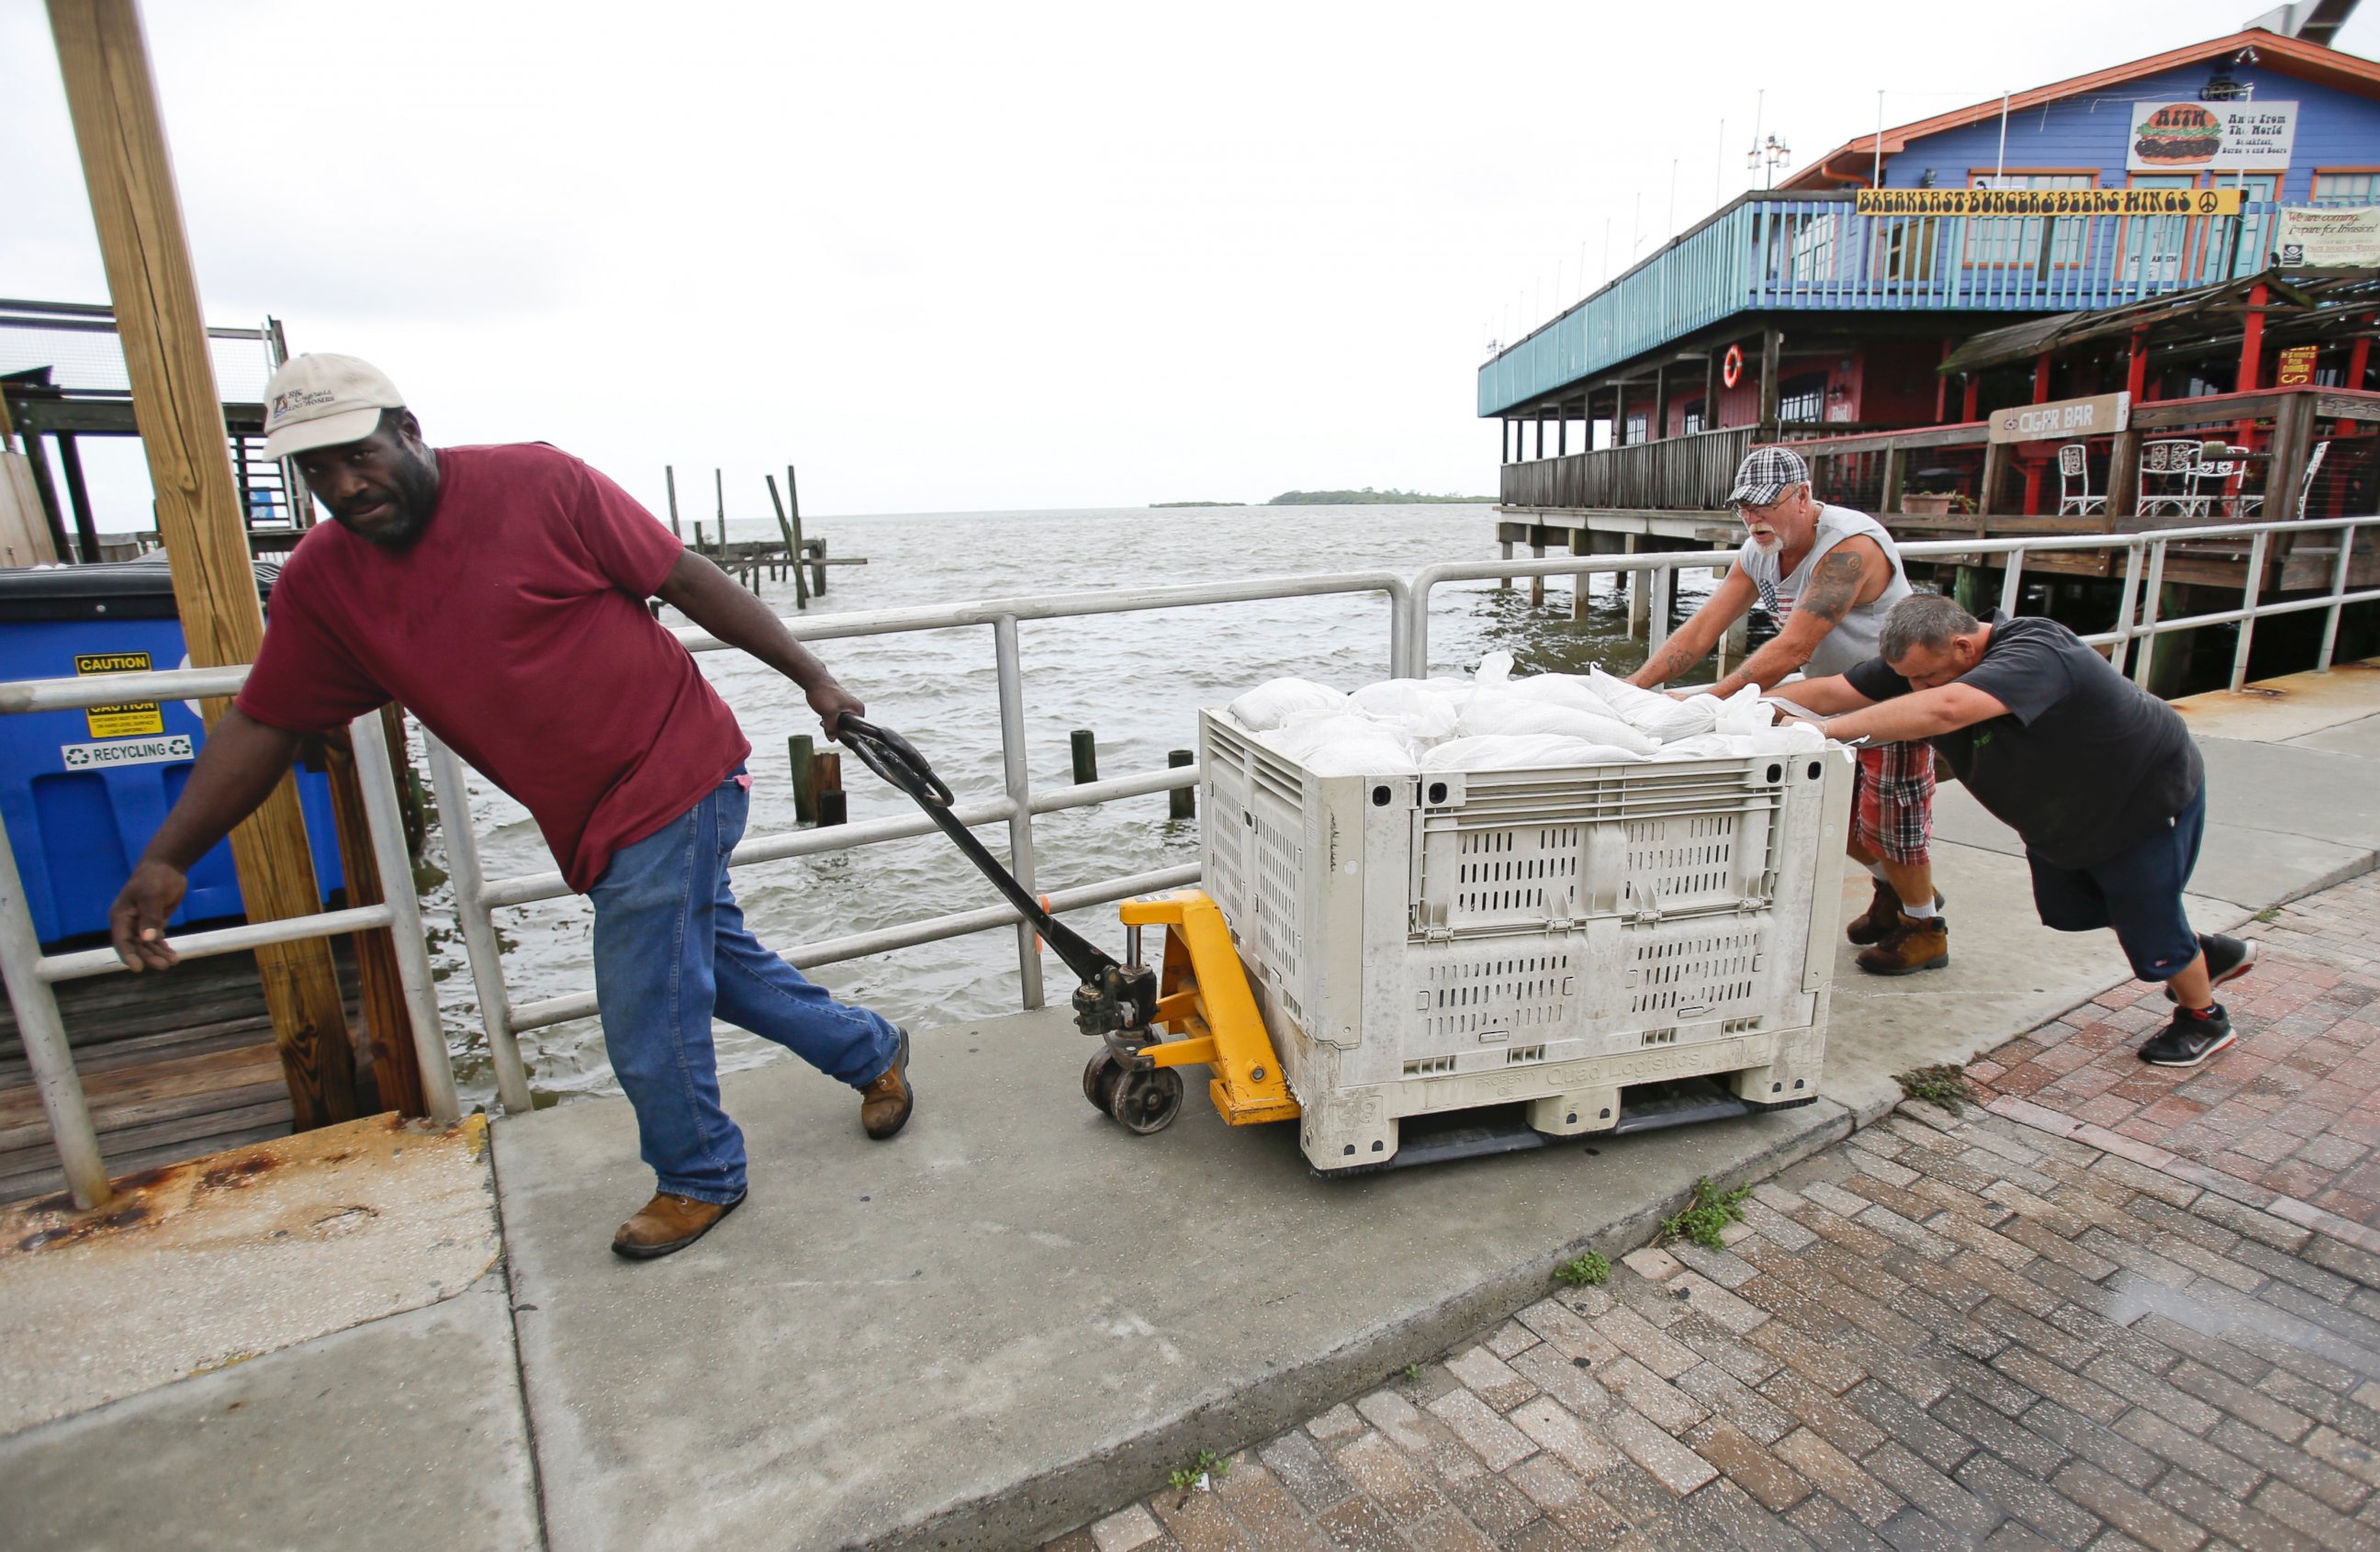 PHOTO: Workers move sandbags to protect a restaurant in preperation for Tropical Storm Hermine, Aug. 31, 2016, in Cedar Key, Florida.